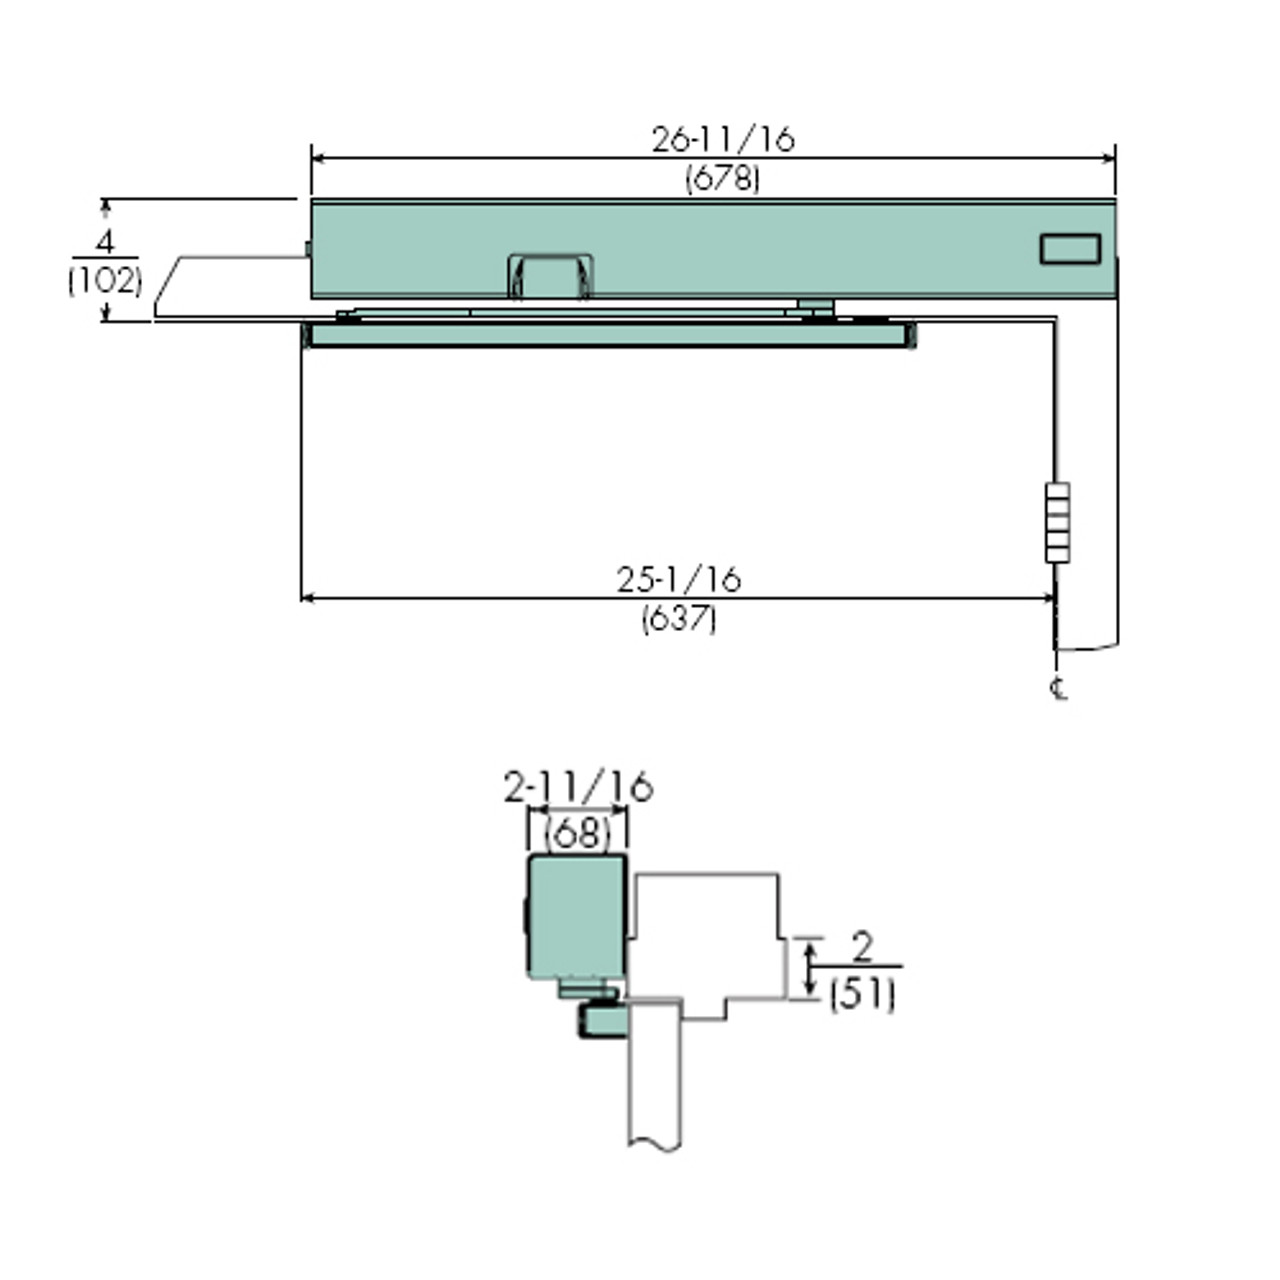 7114SZ-DZ-LH-120VAC-691 Norton 7100SZ Series Safe Zone Multi-Point Closer/Holder with Motion Sensor and Pull Side Rigid Arm and Slide Track in Dull Bronze Finish